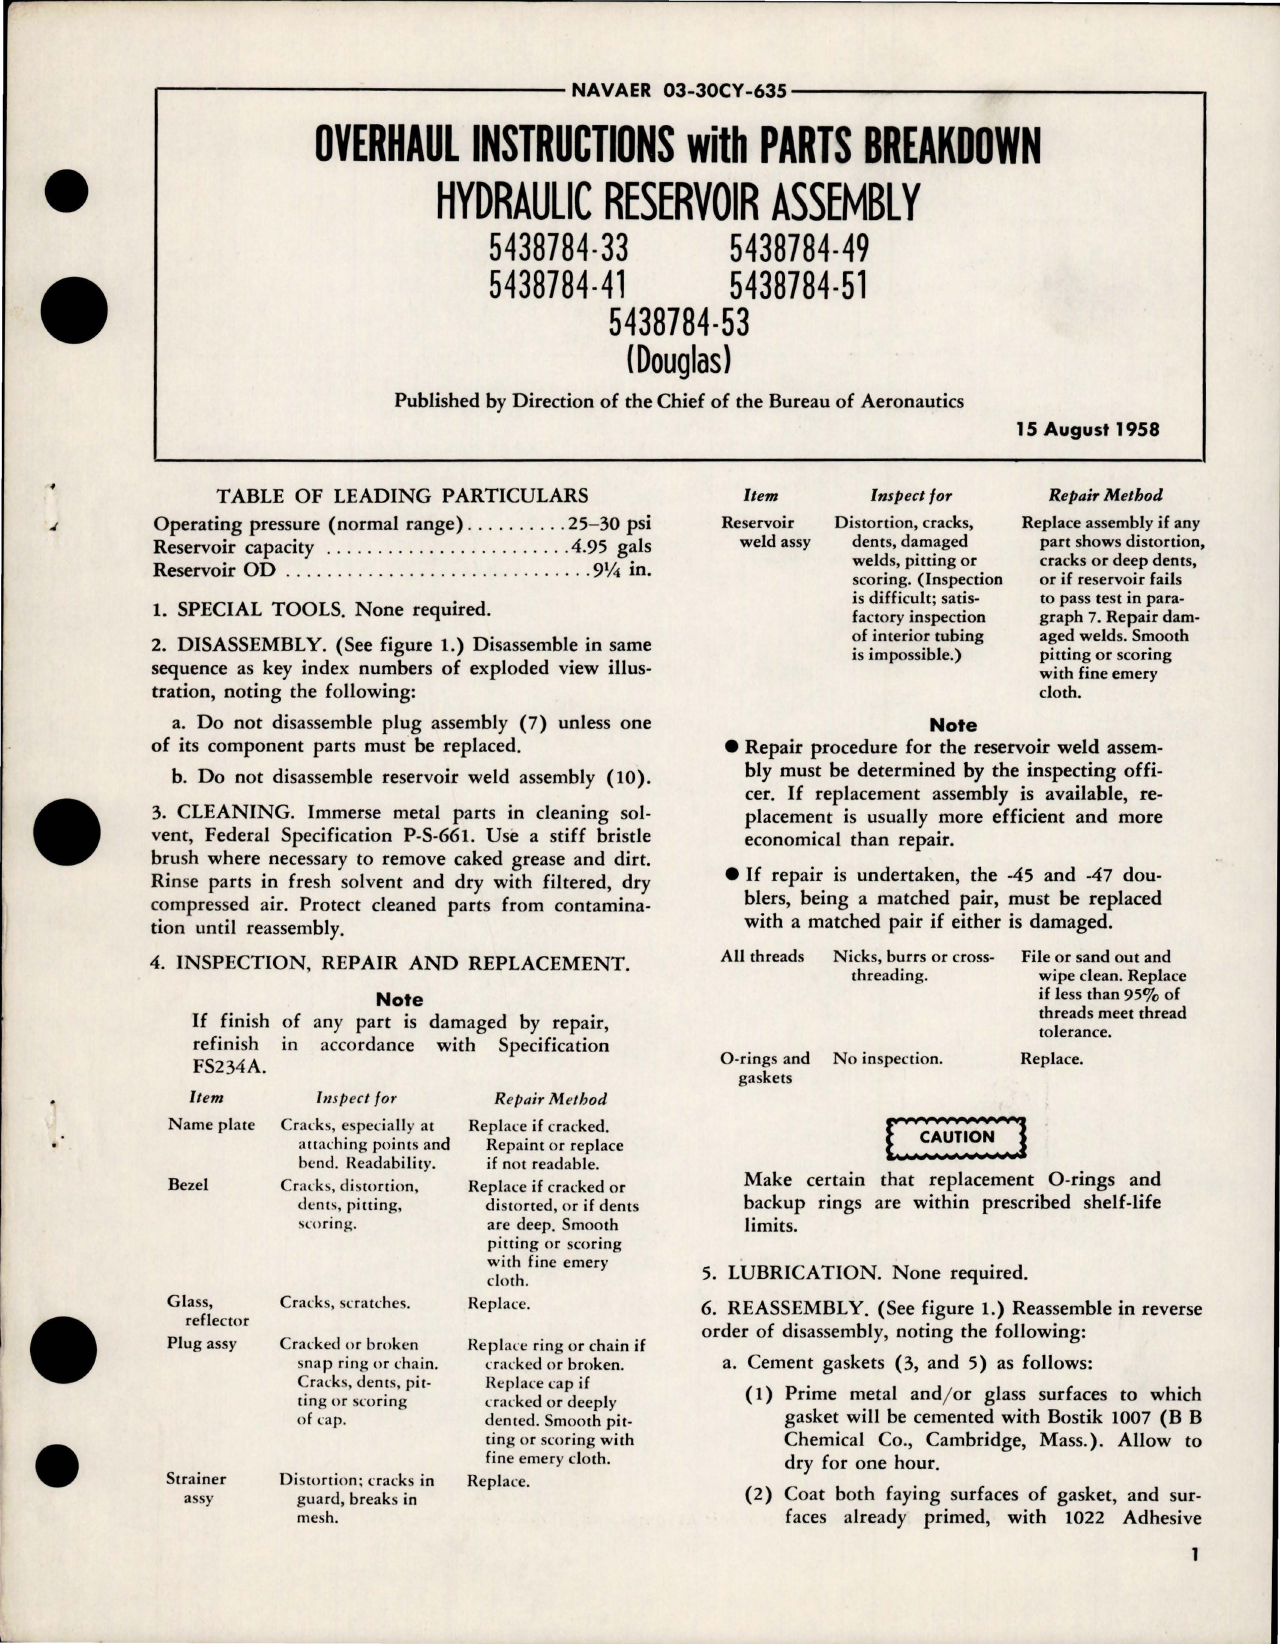 Sample page 1 from AirCorps Library document: Overhaul Instructions with Parts for Hydraulic Reservoir Assembly